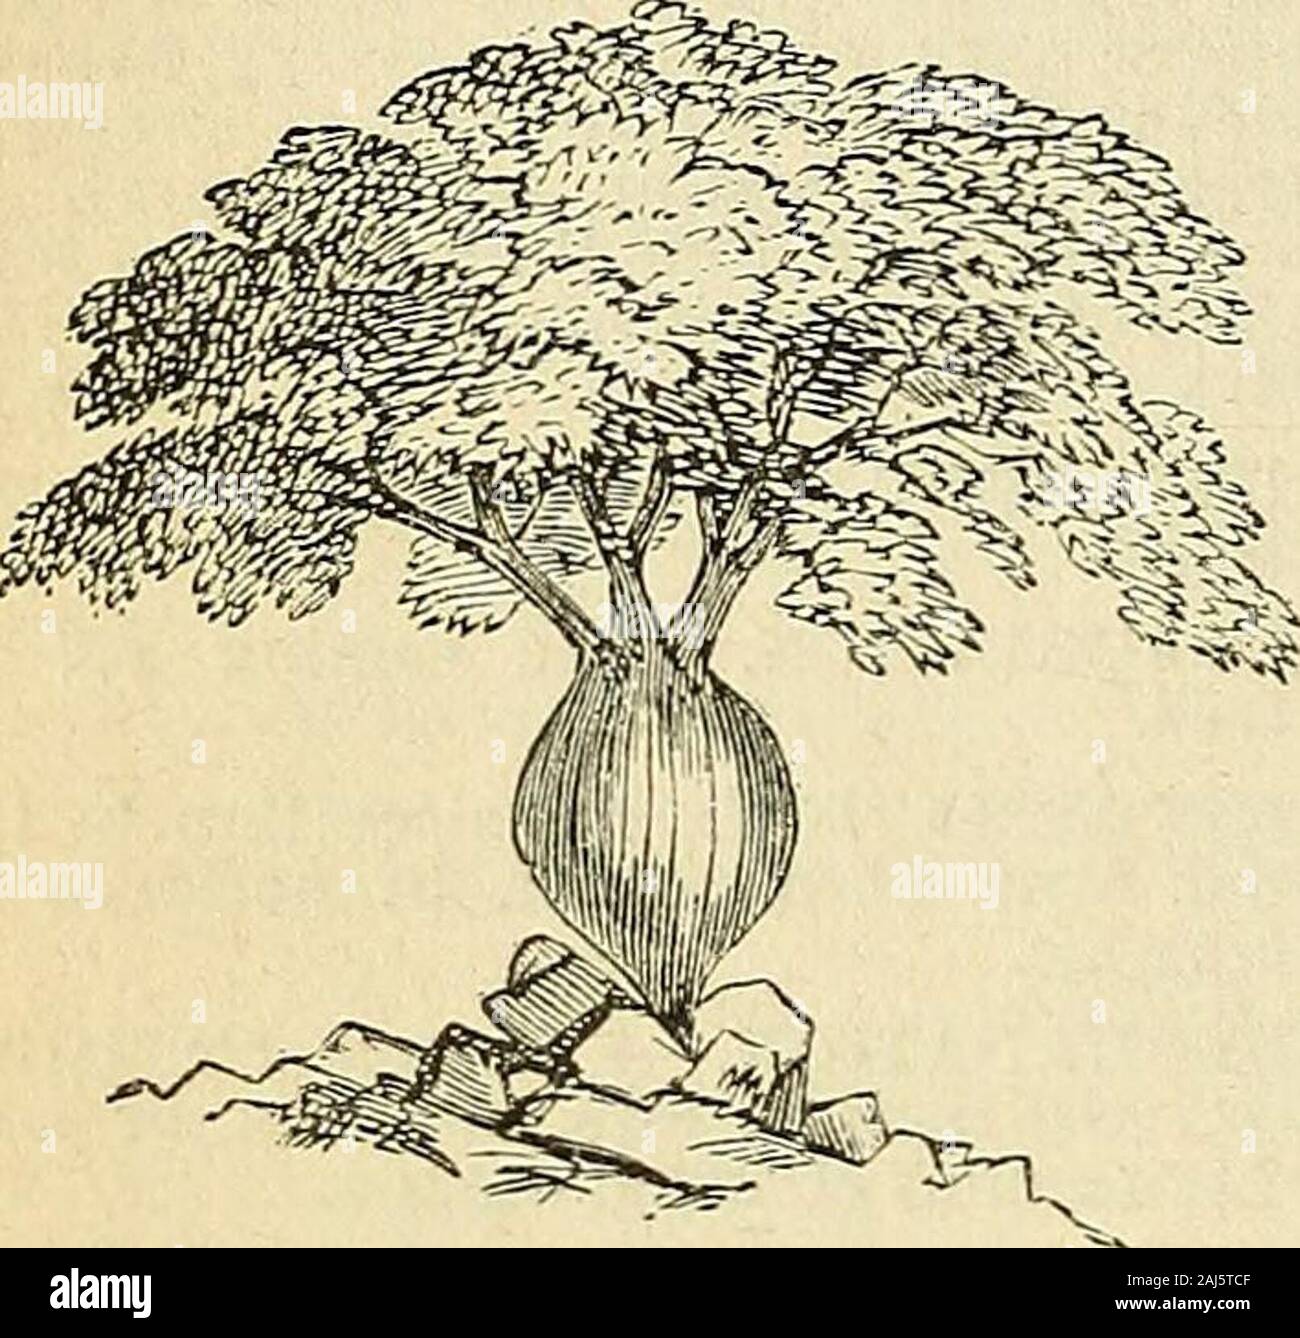 The treasury of botany: a popular dictionary of the vegetable kingdom; with which is incorporated a glossary of botanical terms . gum tragacanth, which is whole-some and nutritious, and is said to be usedas an article of food by the aborigines incases of extreme need. Dr. Lindley, indescribing the tree, says, the wood has aremarkably loose texture; it is soft andbrittle, owing to the presence of an enor-mous quantity of very large tubes of pittedtissue, some of which measure a line anda half across; they form the whole inner dela] Ki)t tEratfurg of SSotattg. 390 face of each woody zone. When b Stock Photo